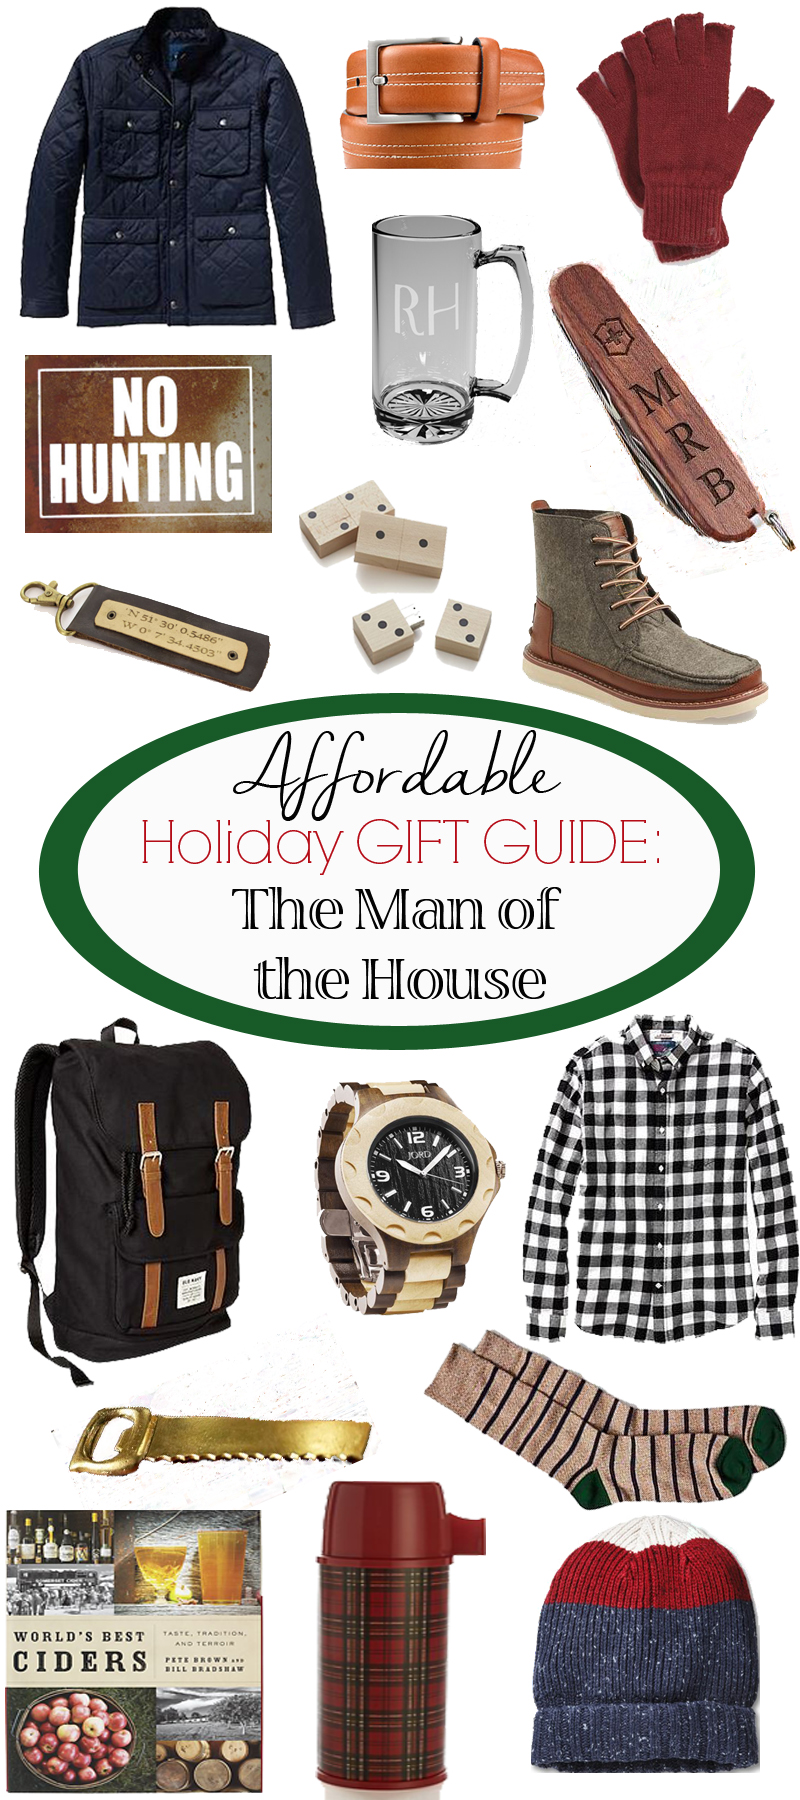 http://thewhitebuffalostylingco.com/wp-content/uploads/2014/11/mans-gift-guide-copy.jpg